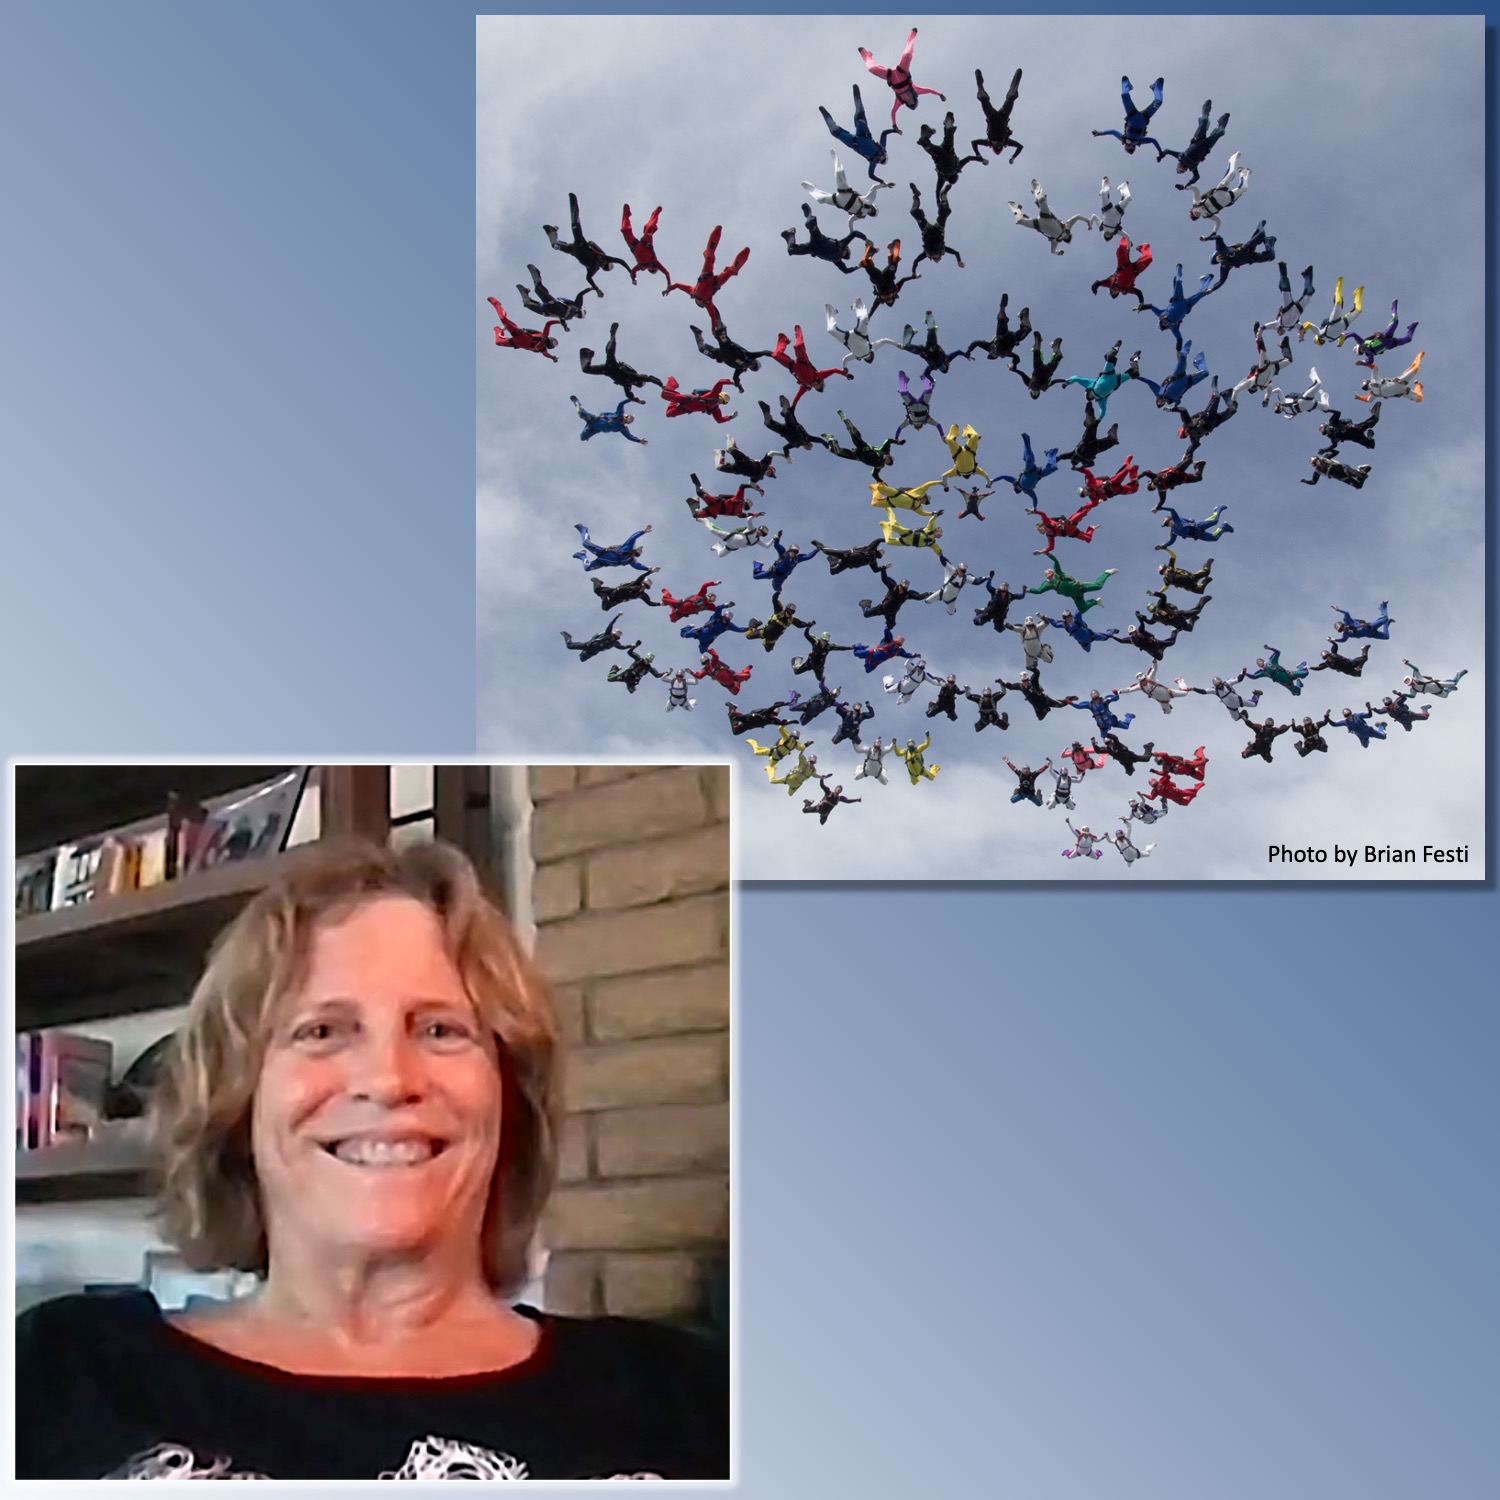 A photo of Kate Cooper-Jensen and a photo of a 111-person skydiving formation.